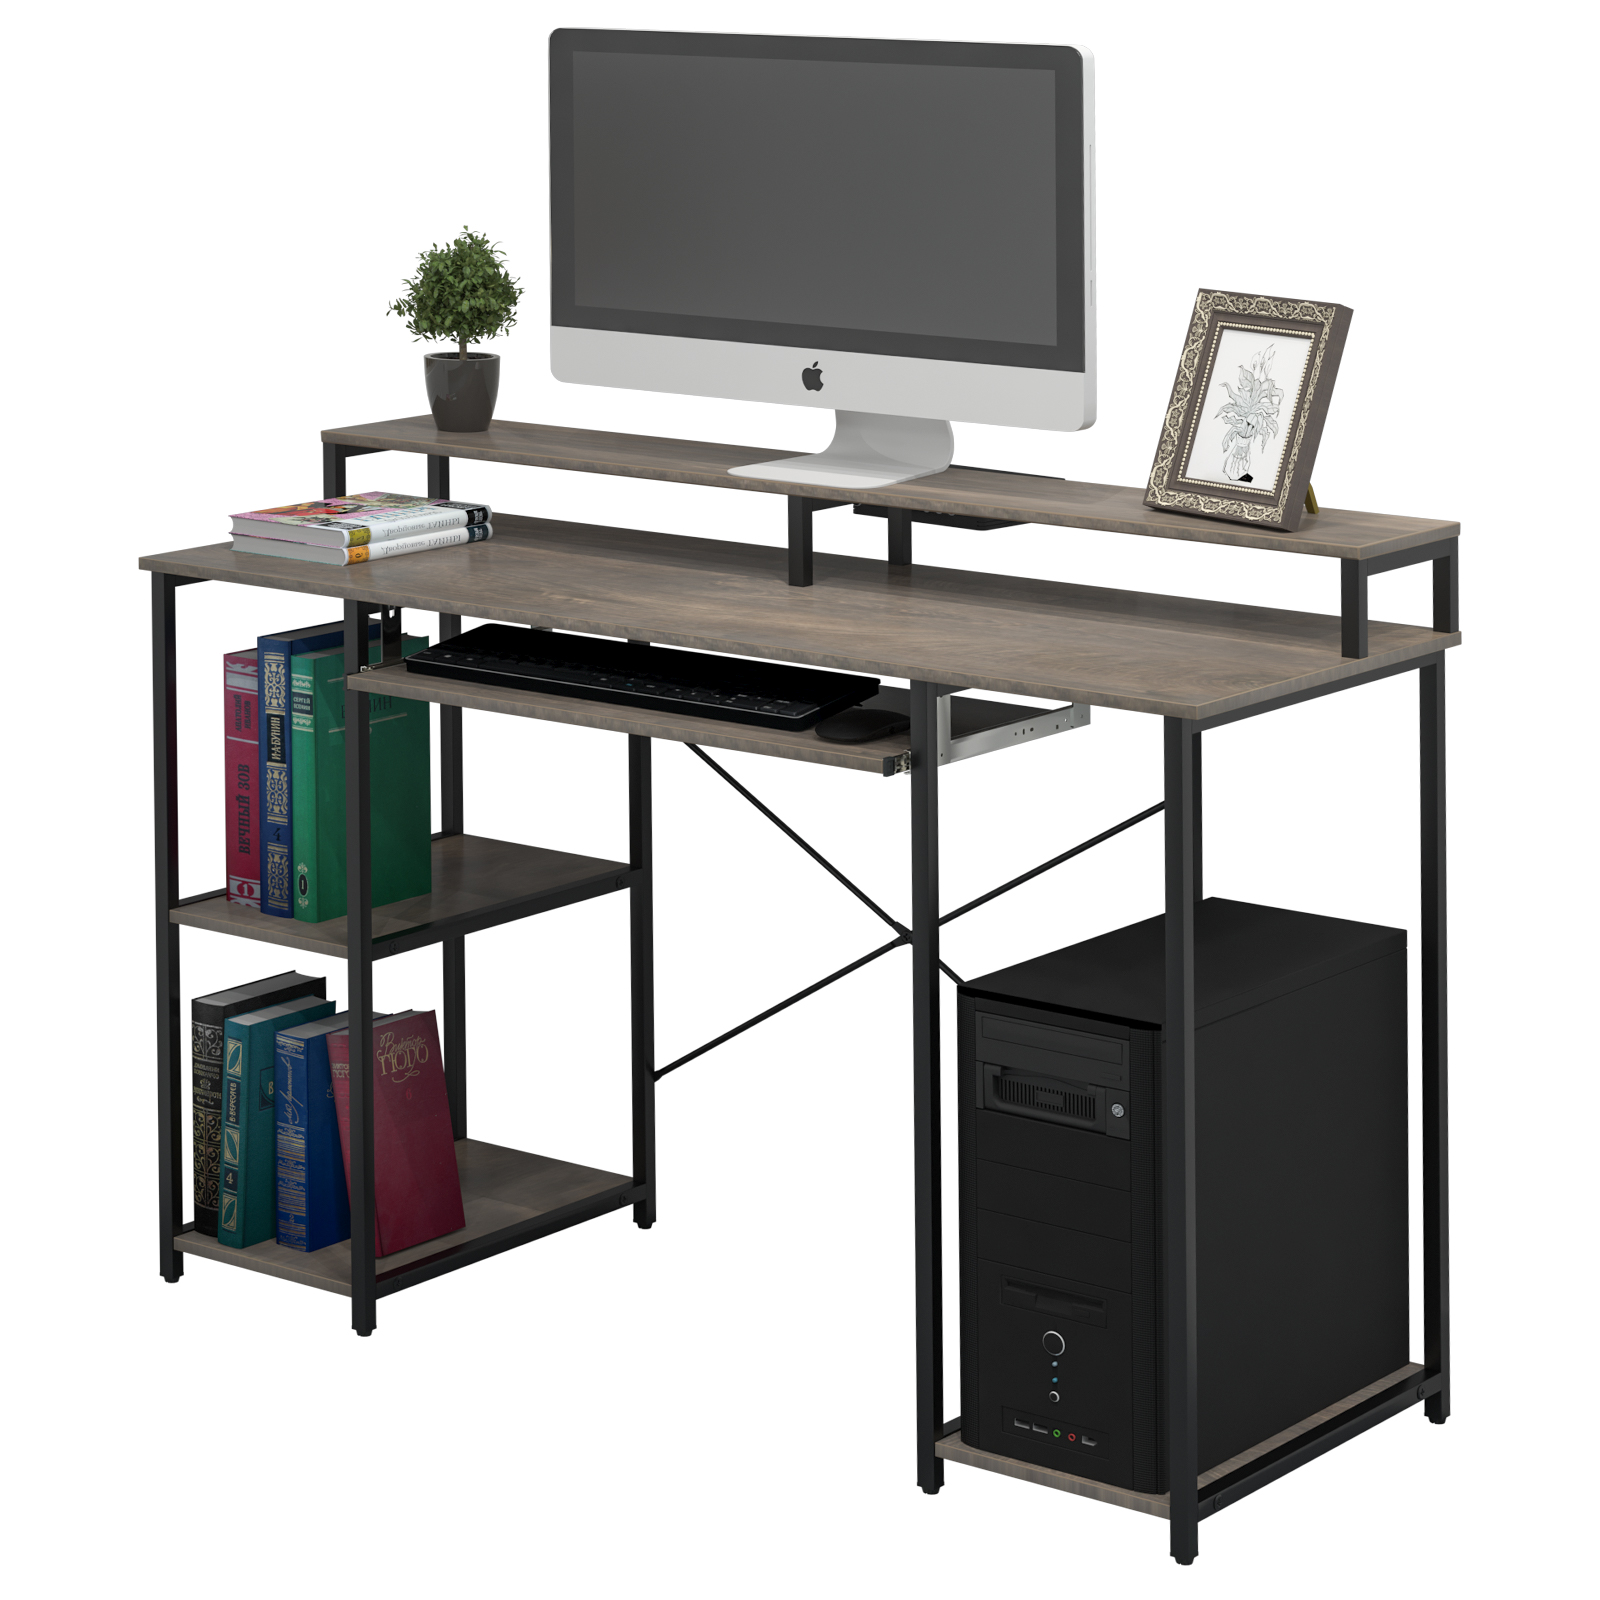 TOPSKY 46.5”Computer Desk with Storage Shelves/23.2" Keyboard Tray/Monitor Stand Study Table for Home Office S-205